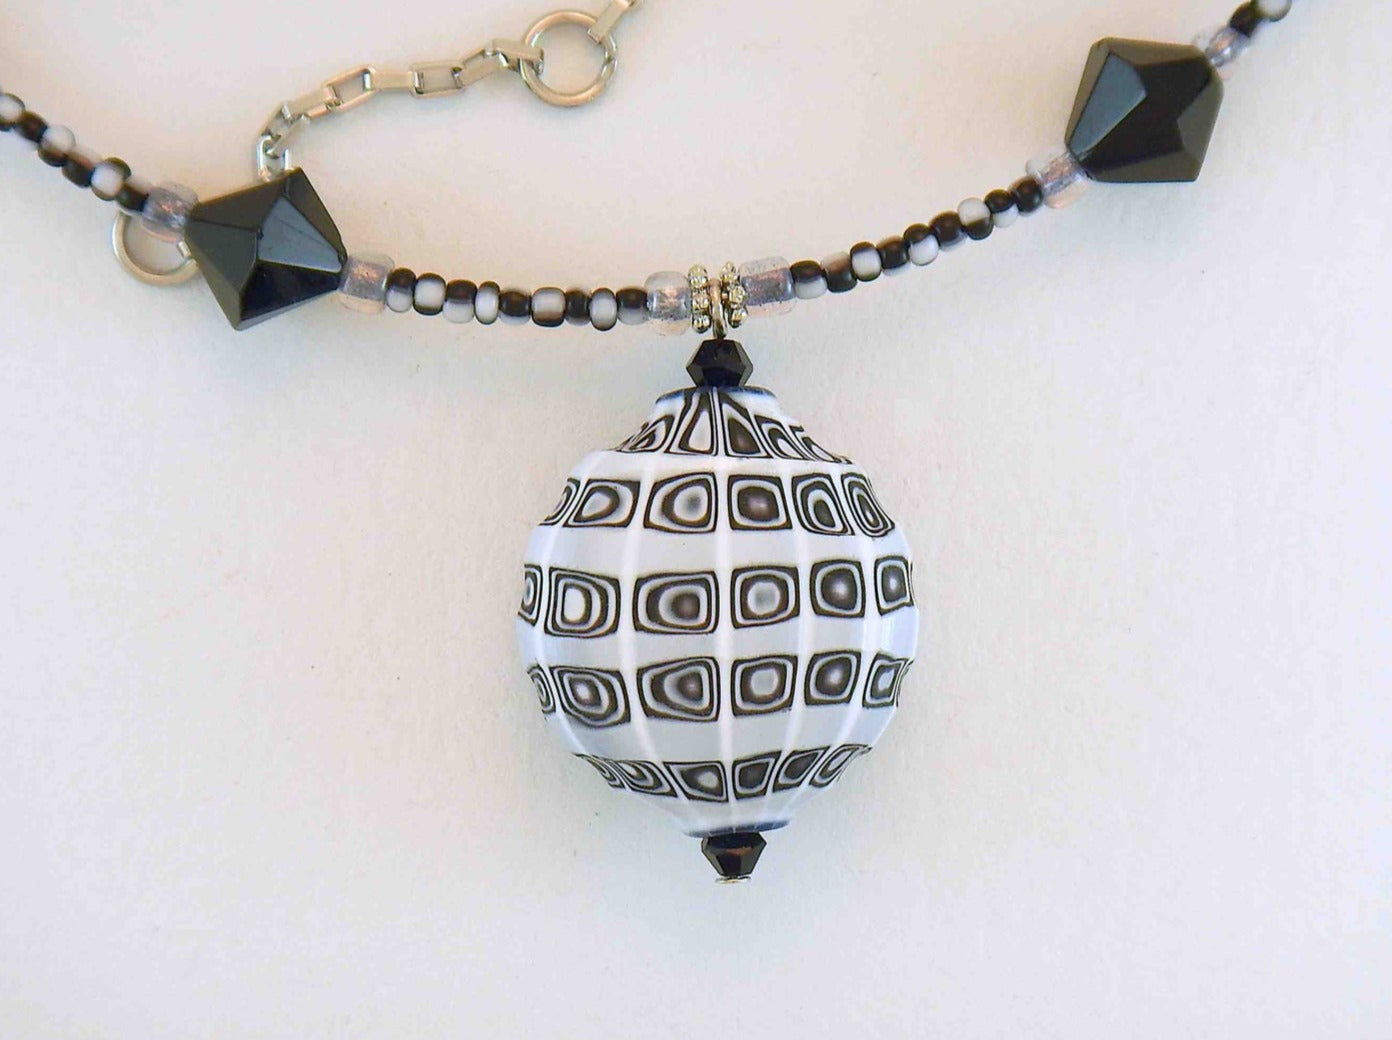 14-inch necklace with black & white patterned faceted Murano blown glass pendant, matching Swarovski crystals and glass beads, rectangle-link stainless steel chain